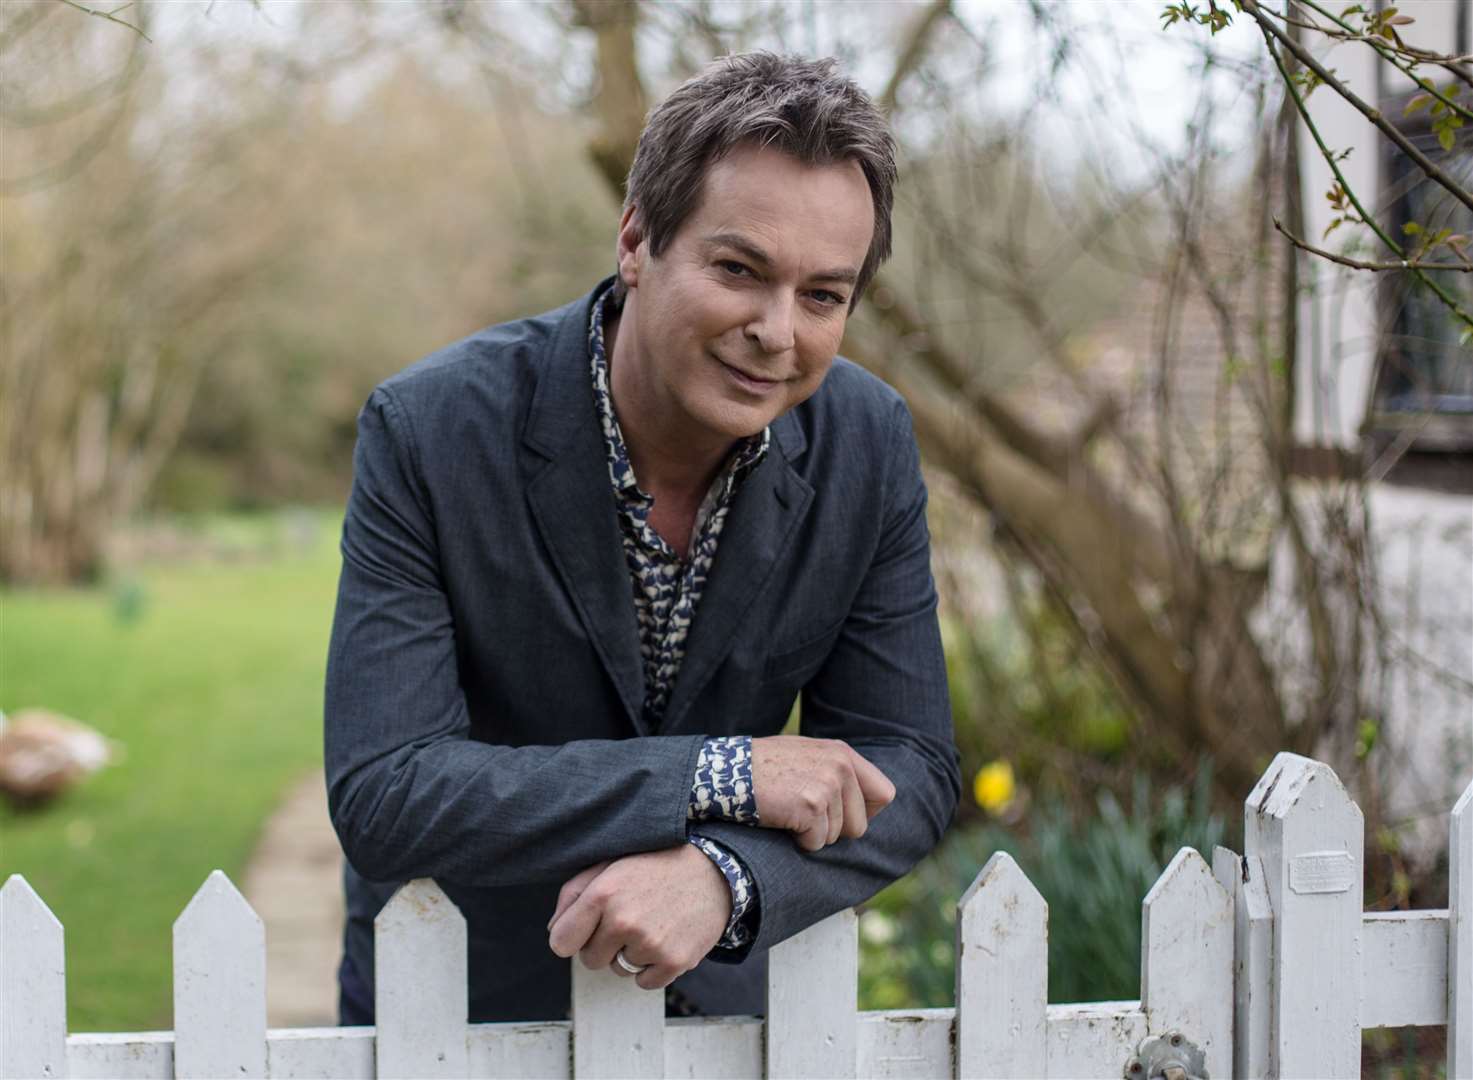 Julian Clary has vowed never to return to Chatham